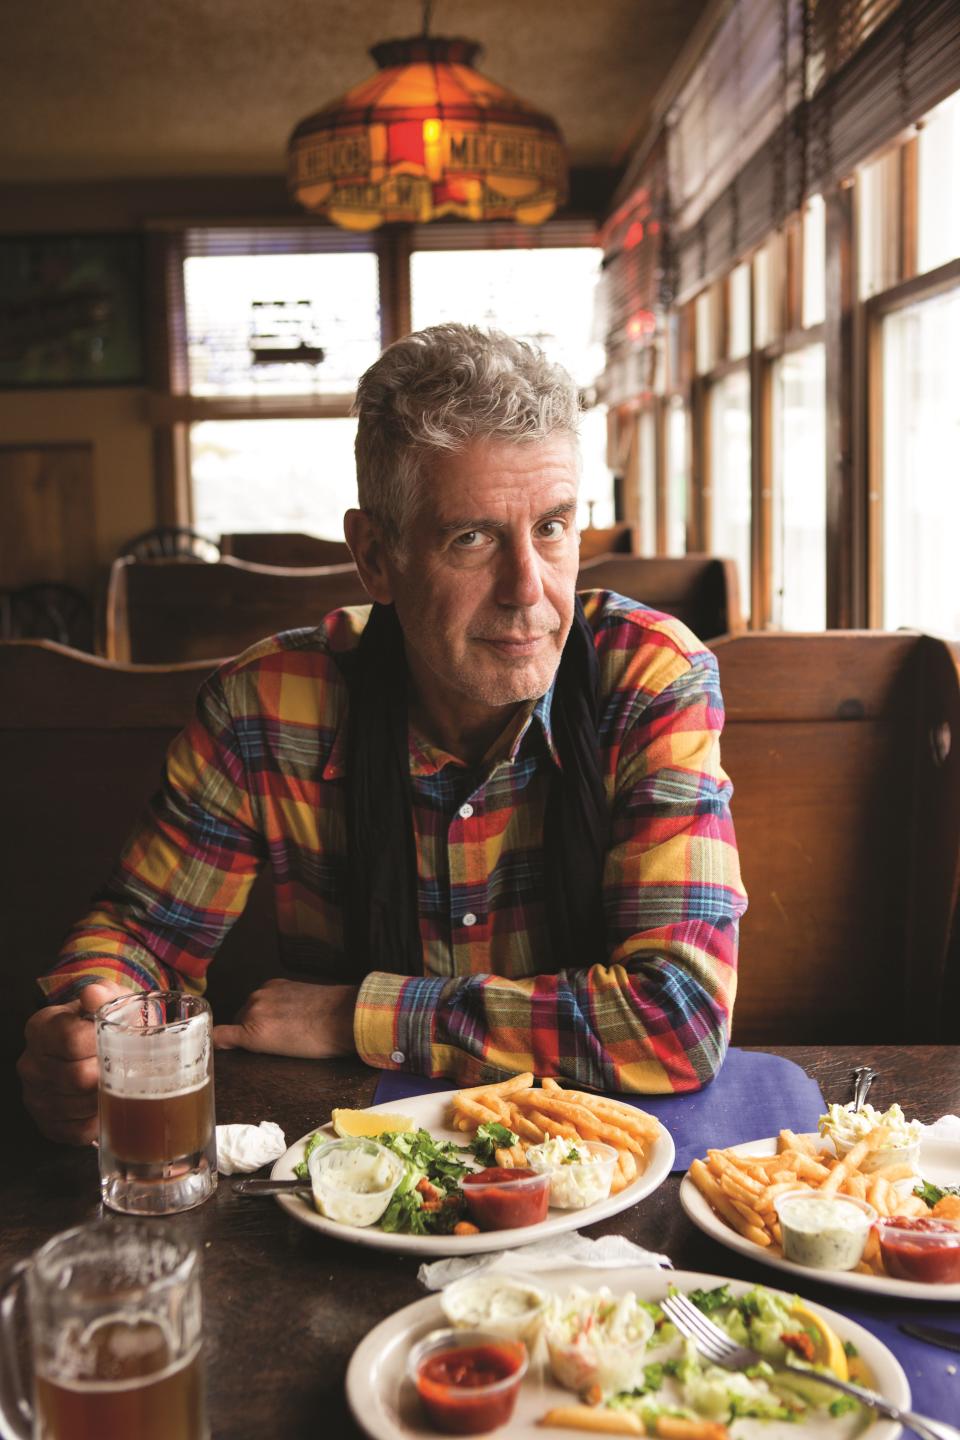 Photo credit: CNN Staff from ANTHONY BOURDAIN REMEMBERED. Copyright 2019 by CNN. Excerpted by permission of Ecco, an imprint of HarperCollins Publishers